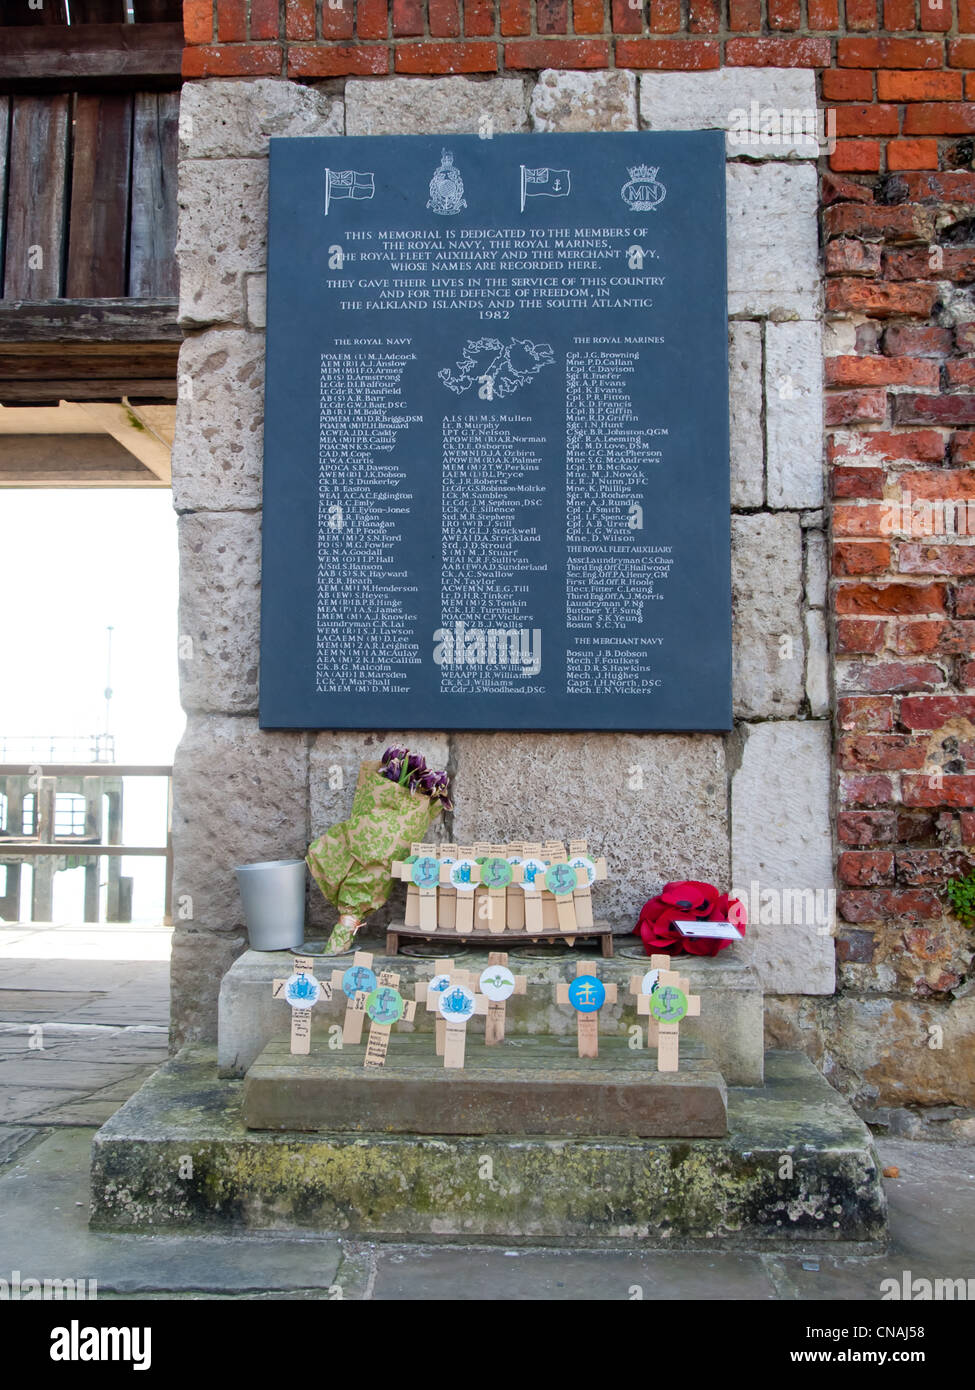 the Falklands War Memorial at the base of the square tower, old Portsmouth, England Stock Photo